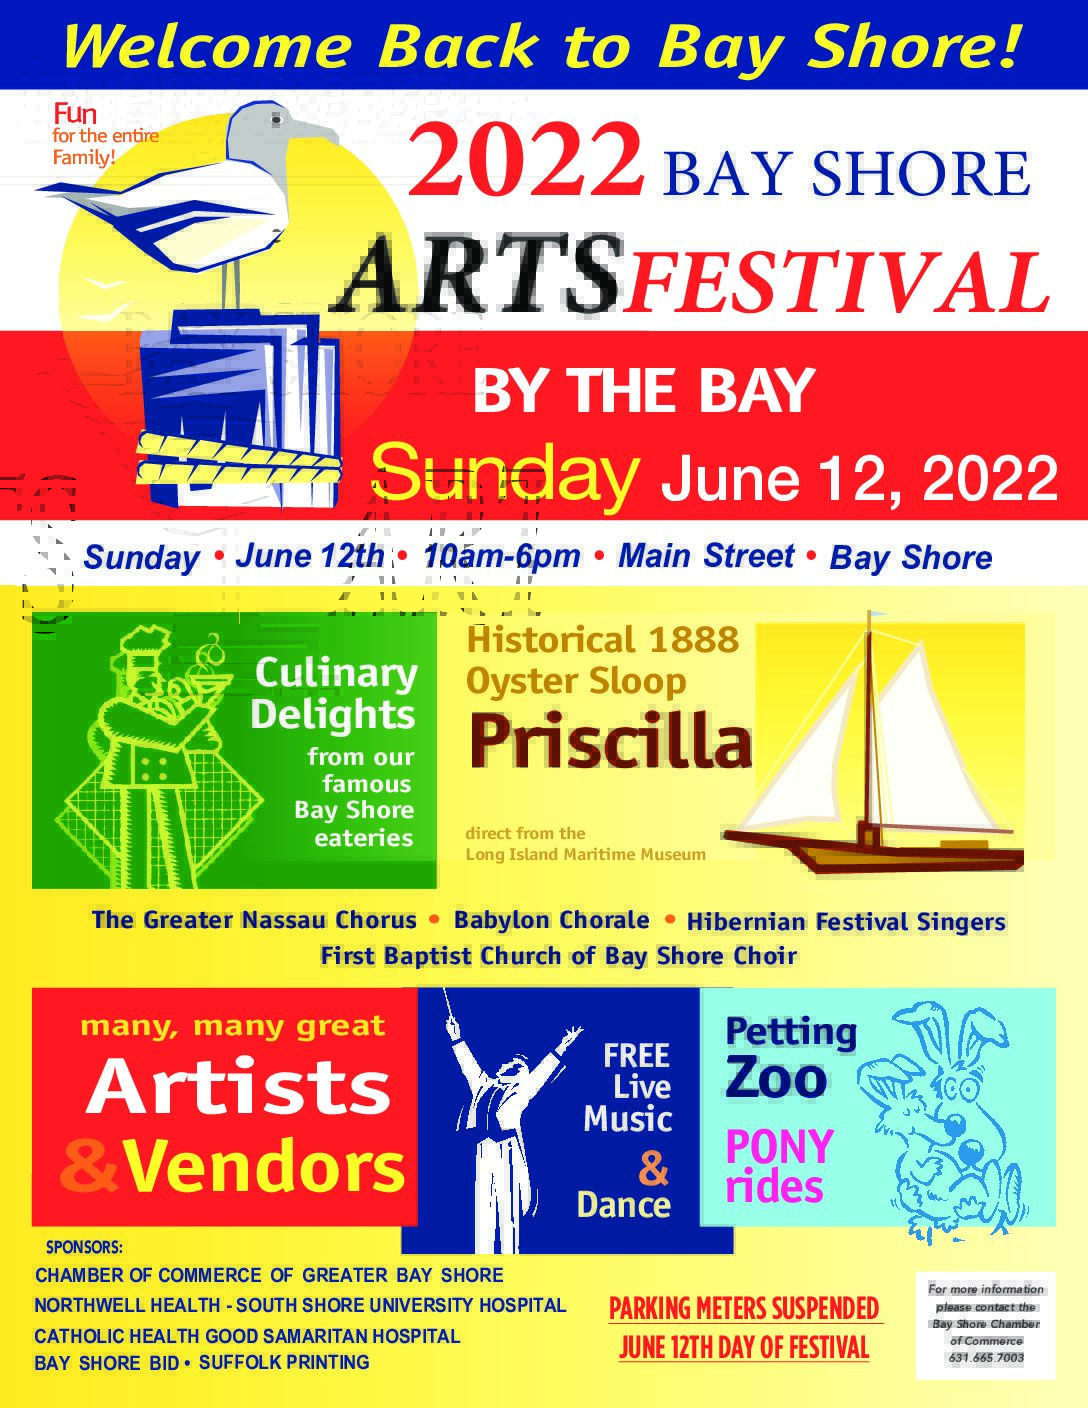 Back To Bay Shore 2022 Festival This Sunday! Long Island